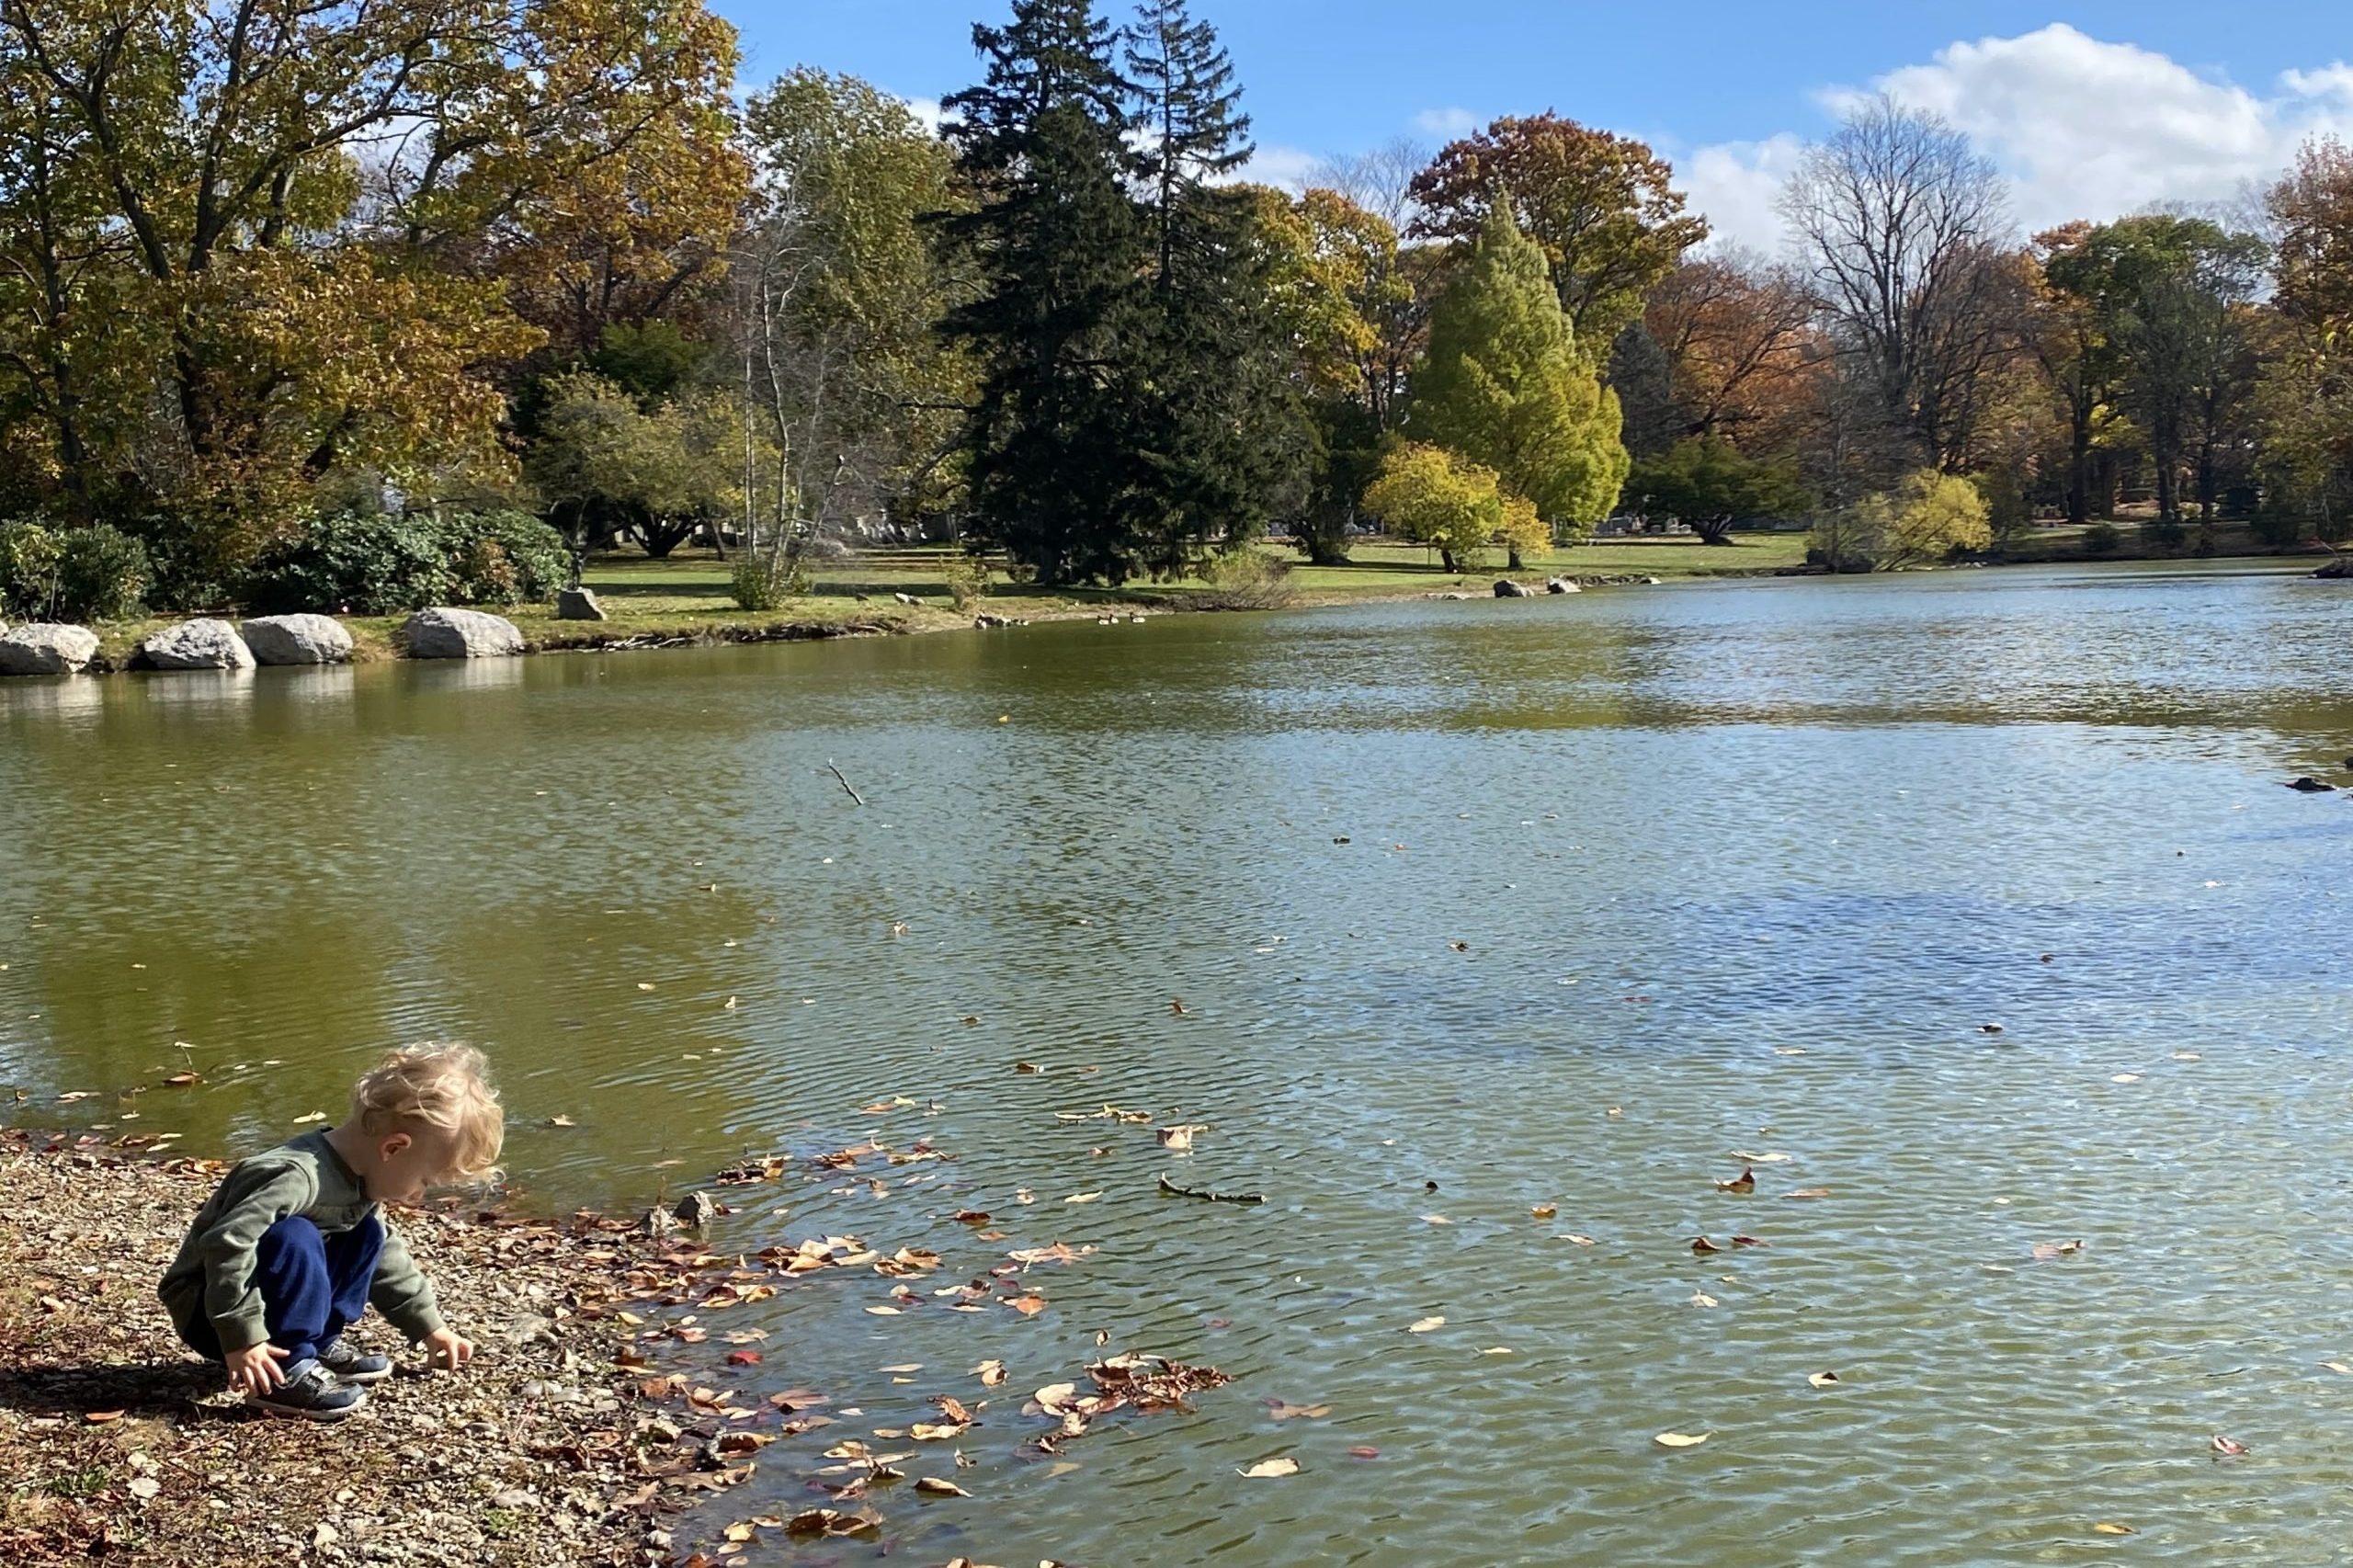 Little boy playing by pond in Fall